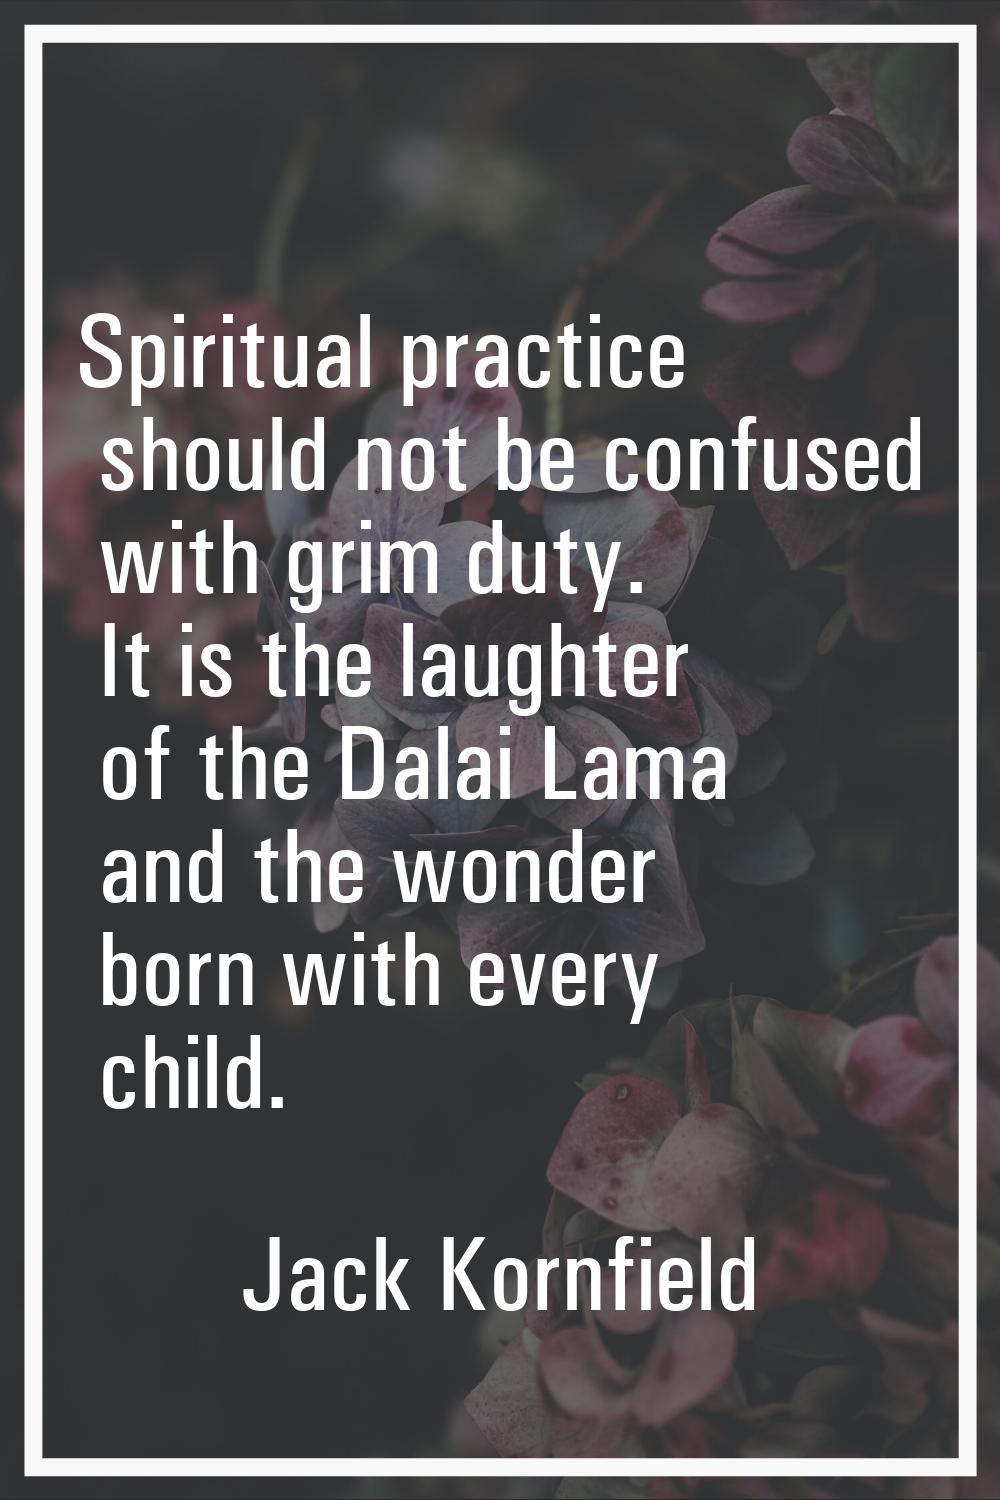 Spiritual practice should not be confused with grim duty. It is the laughter of the Dalai Lama and 